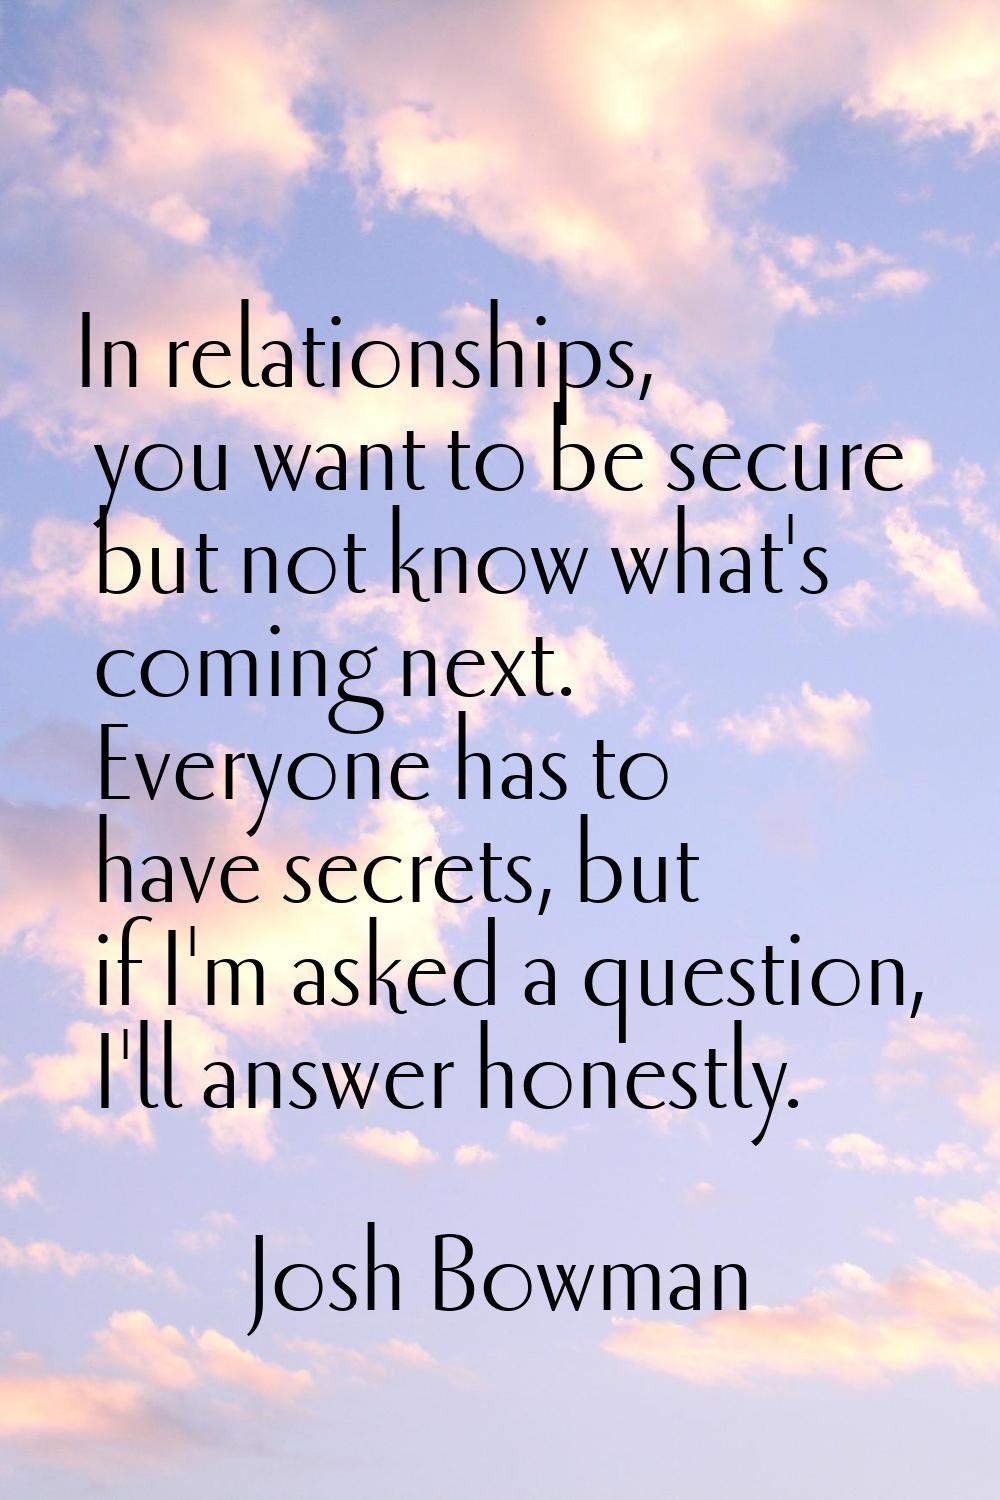 In relationships, you want to be secure but not know what's coming next. Everyone has to have secre